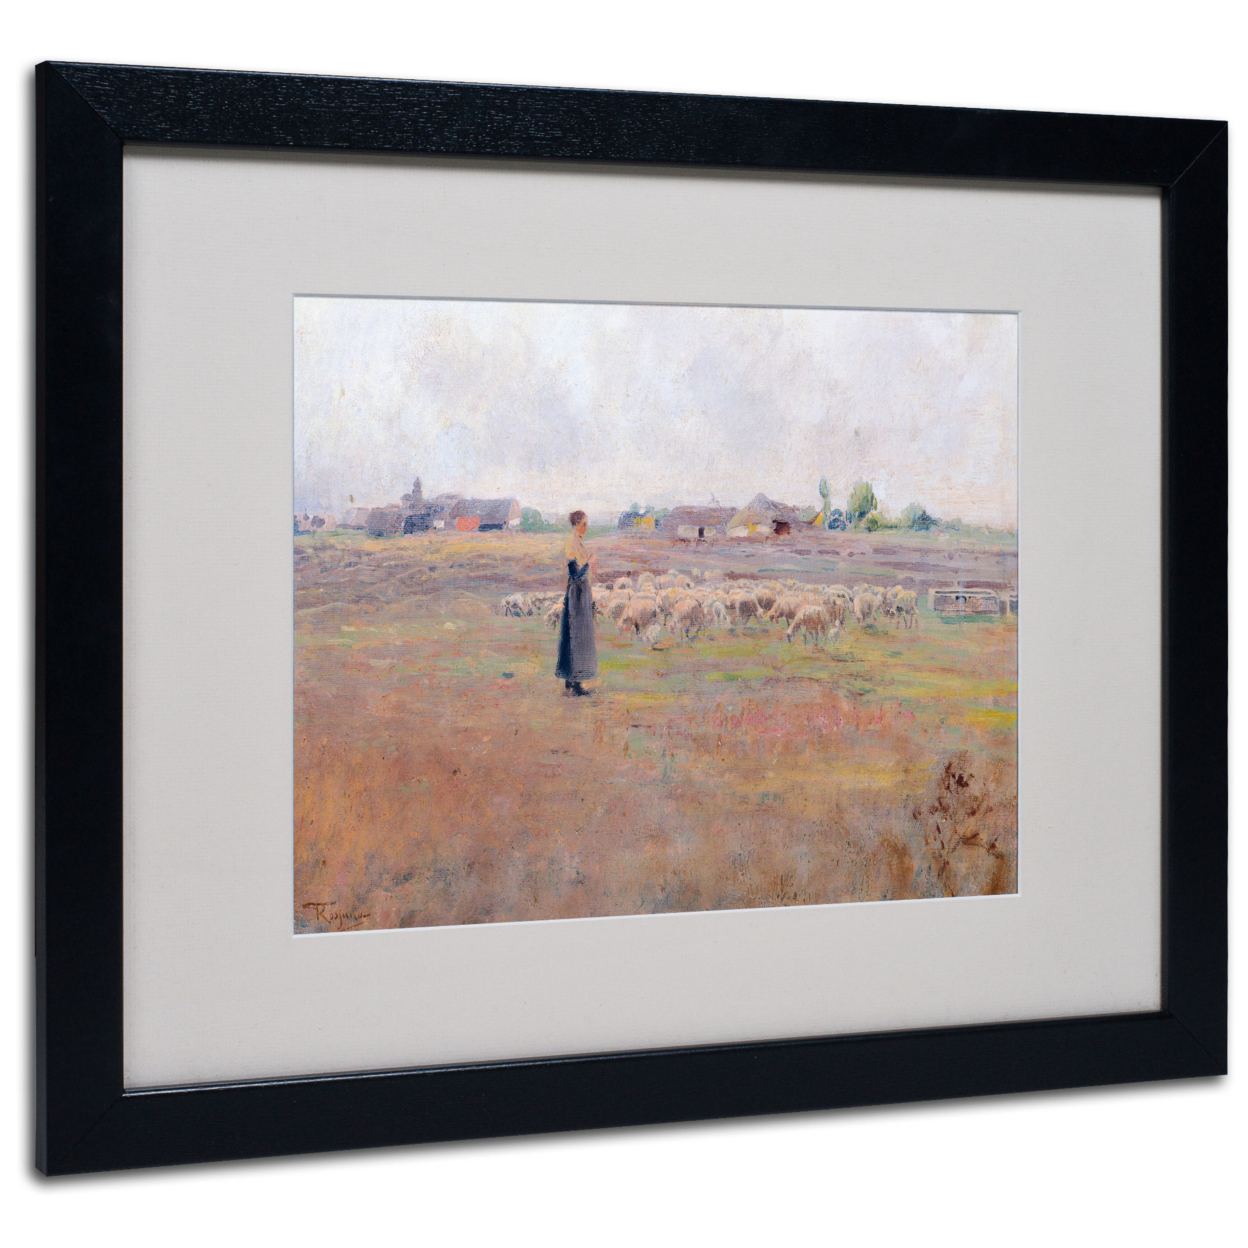 Federico Rossano 'The Peace Of Evening' Black Wooden Framed Art 18 X 22 Inches